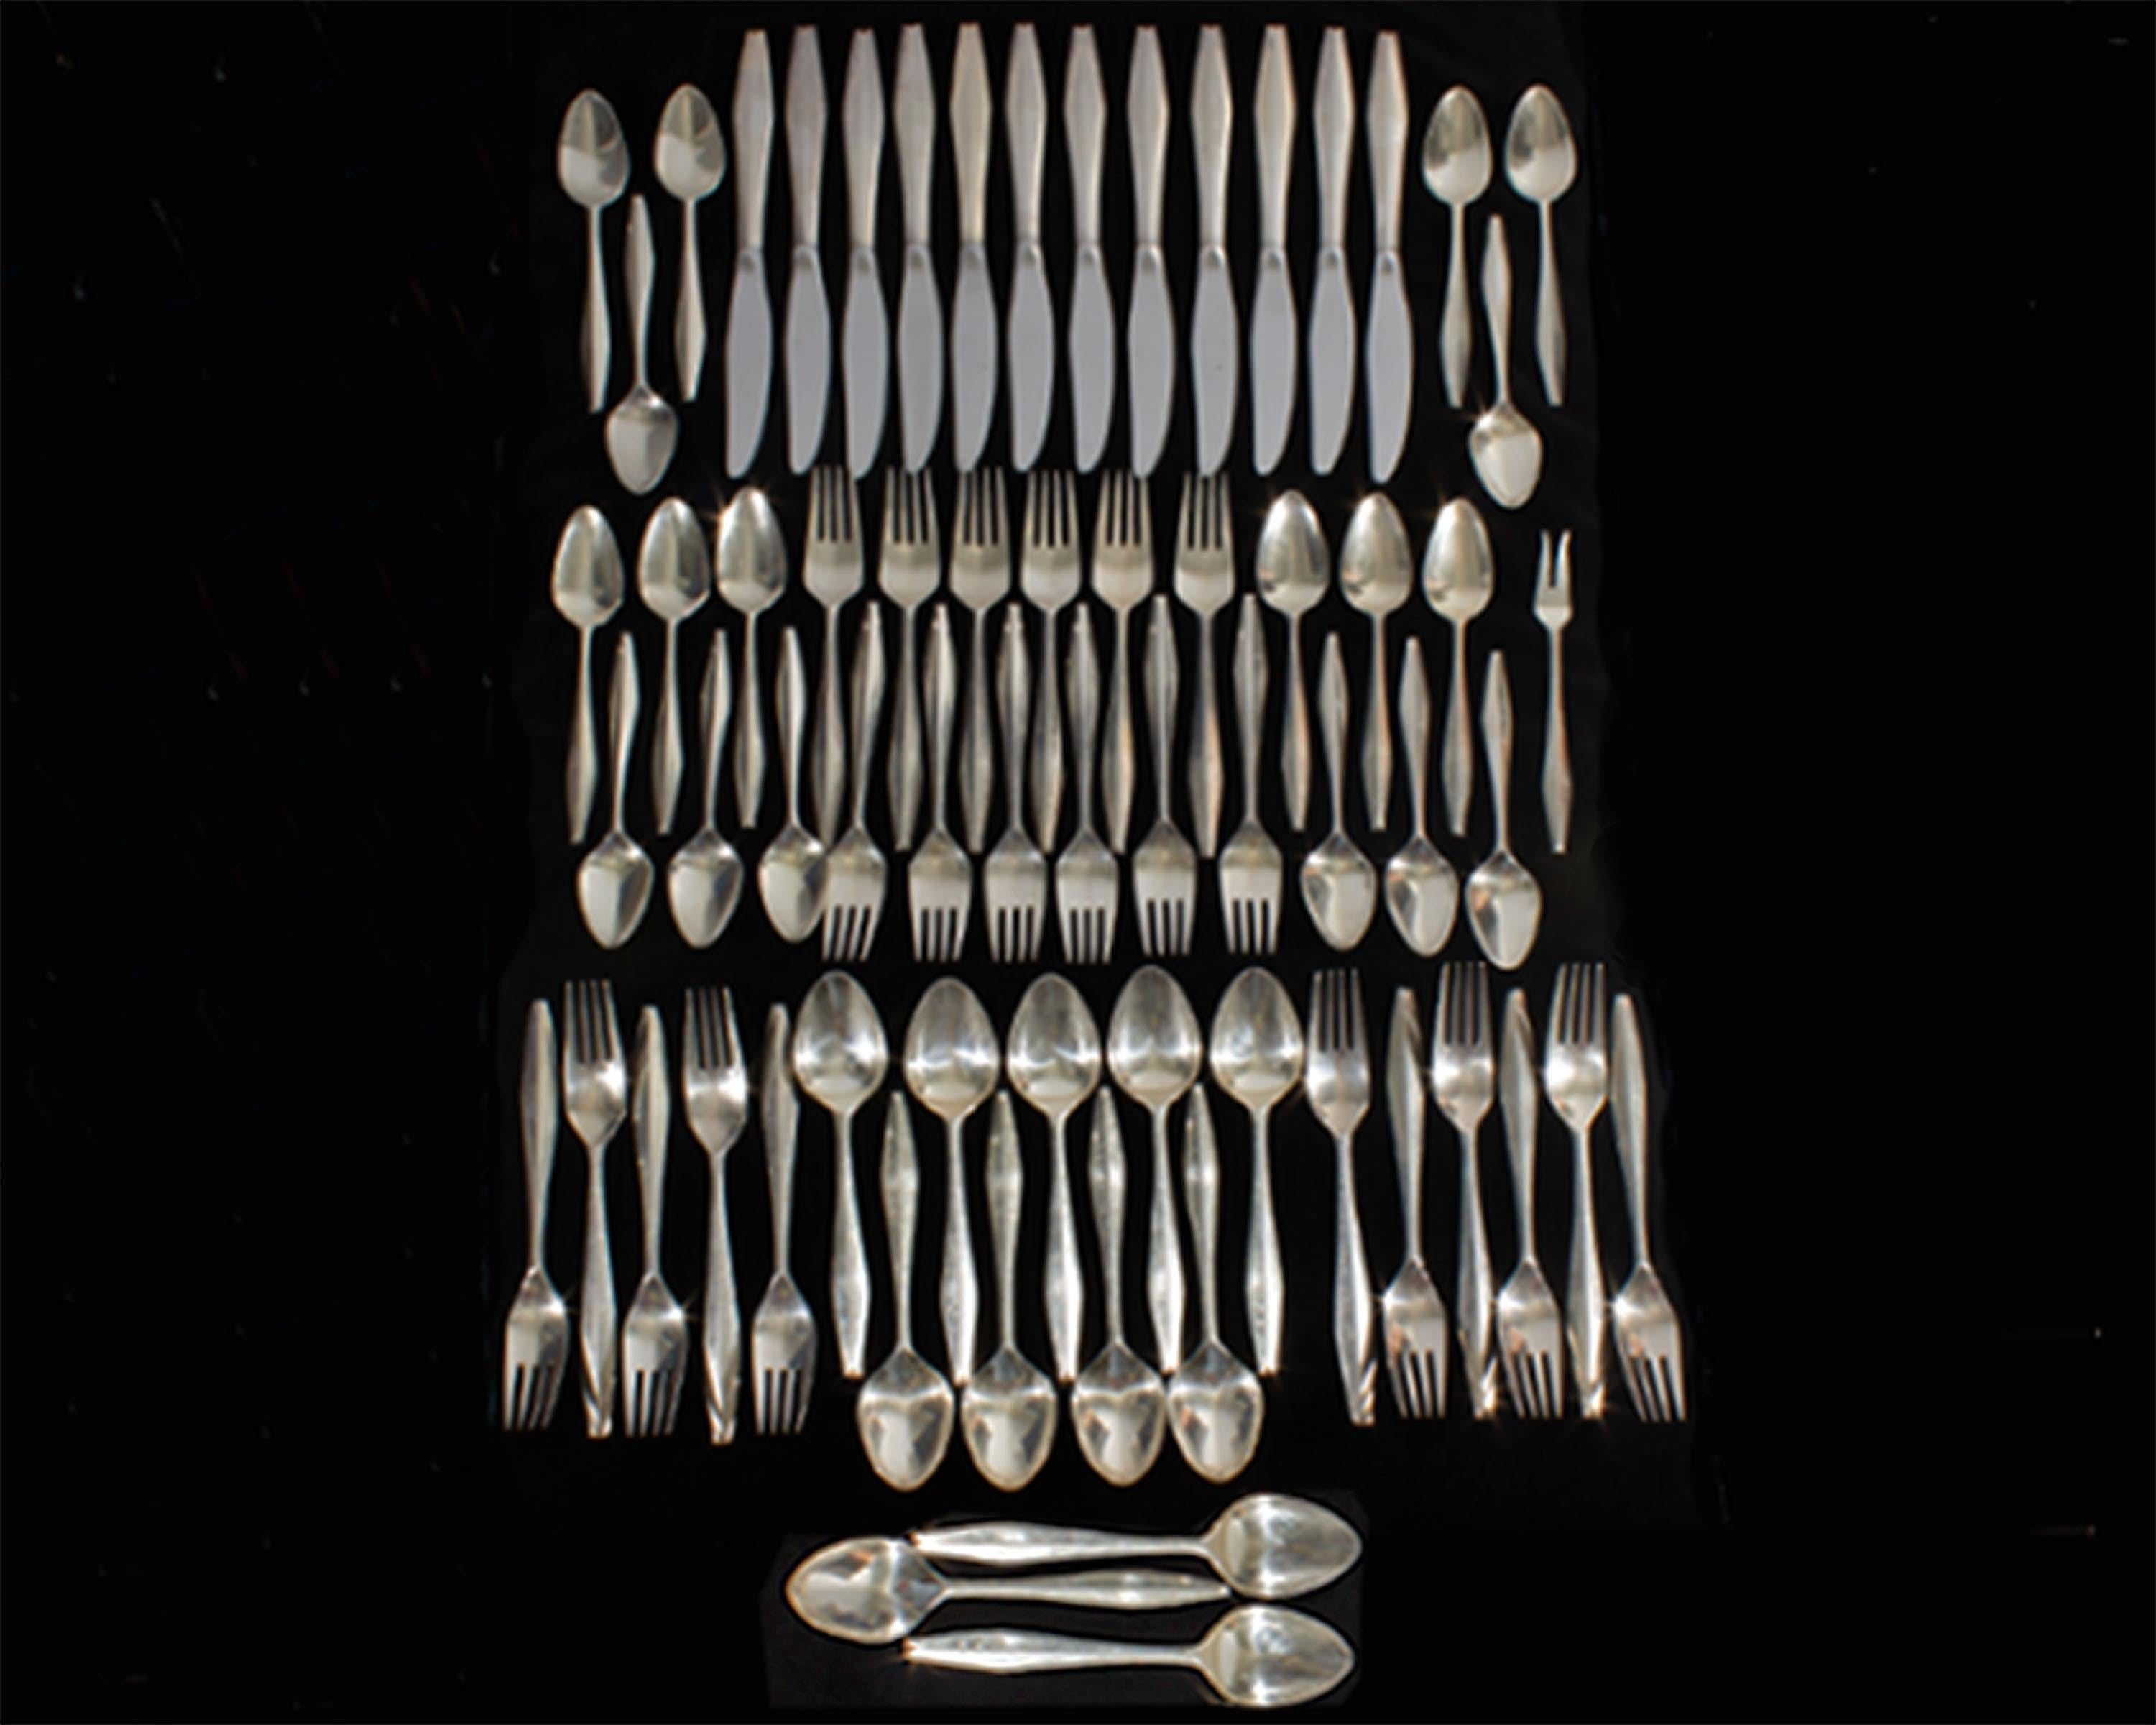 A set of sterling silver flatware designed by Italian designer Gio Ponti (1891-1979) for Reed & Barton. This set of flatware is in the Diamond pattern, a pattern originally introduced in 1958. The solid sterling pieces are marked 